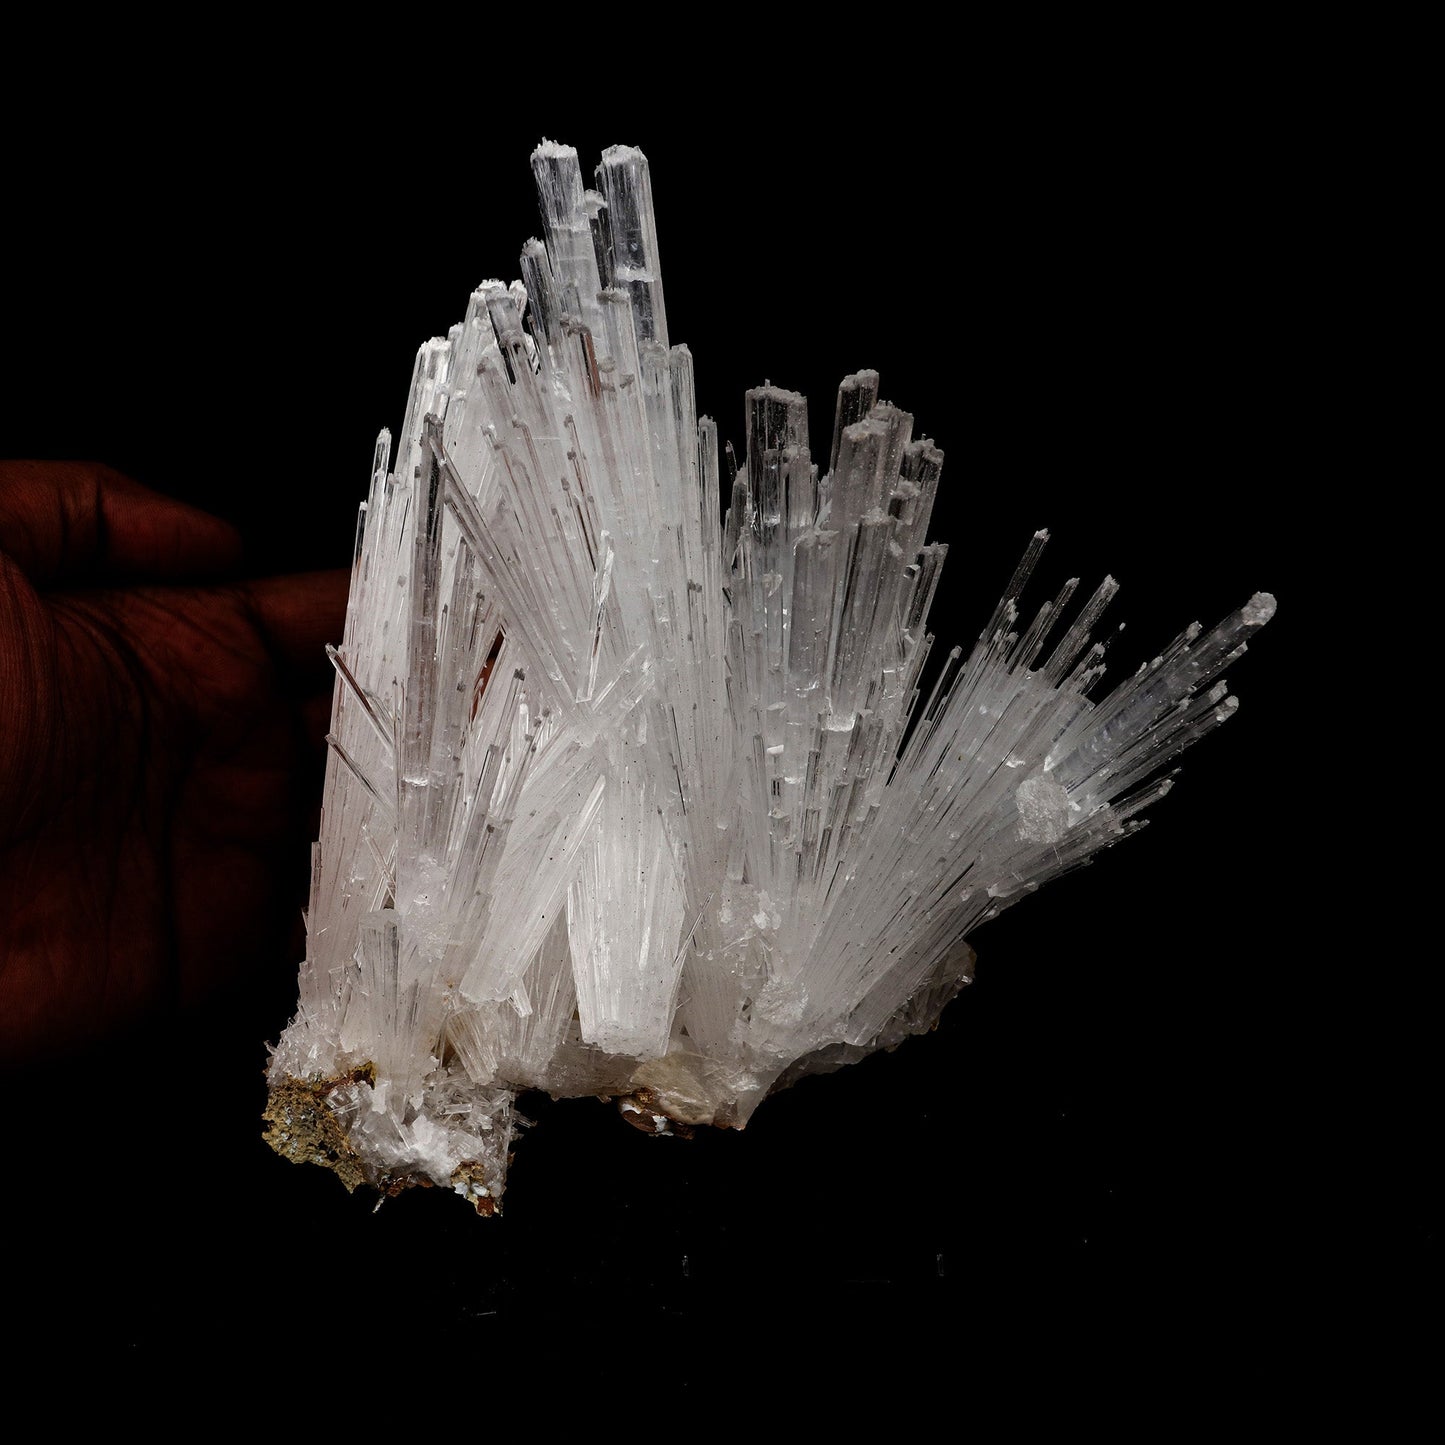 Scolecite Intergrown Sprays on Stilbite Natural Mineral Specimen # B …  https://www.superbminerals.us/products/scolecite-intergrown-sprays-natural-mineral-specimen-b-5207  Features: Recent discoveries in Nashik have yielded some spectacular intergrown jackstraw sprays of glassy, iridescent, clear to translucent scolecite prism. STUNNING. The stunning crystals extend in every direction. Primary Mineral(s): ScoleciteSecondary Mineral(s): N/AMatrix: N/A 6 Inch x 5 InchWeight : 505 